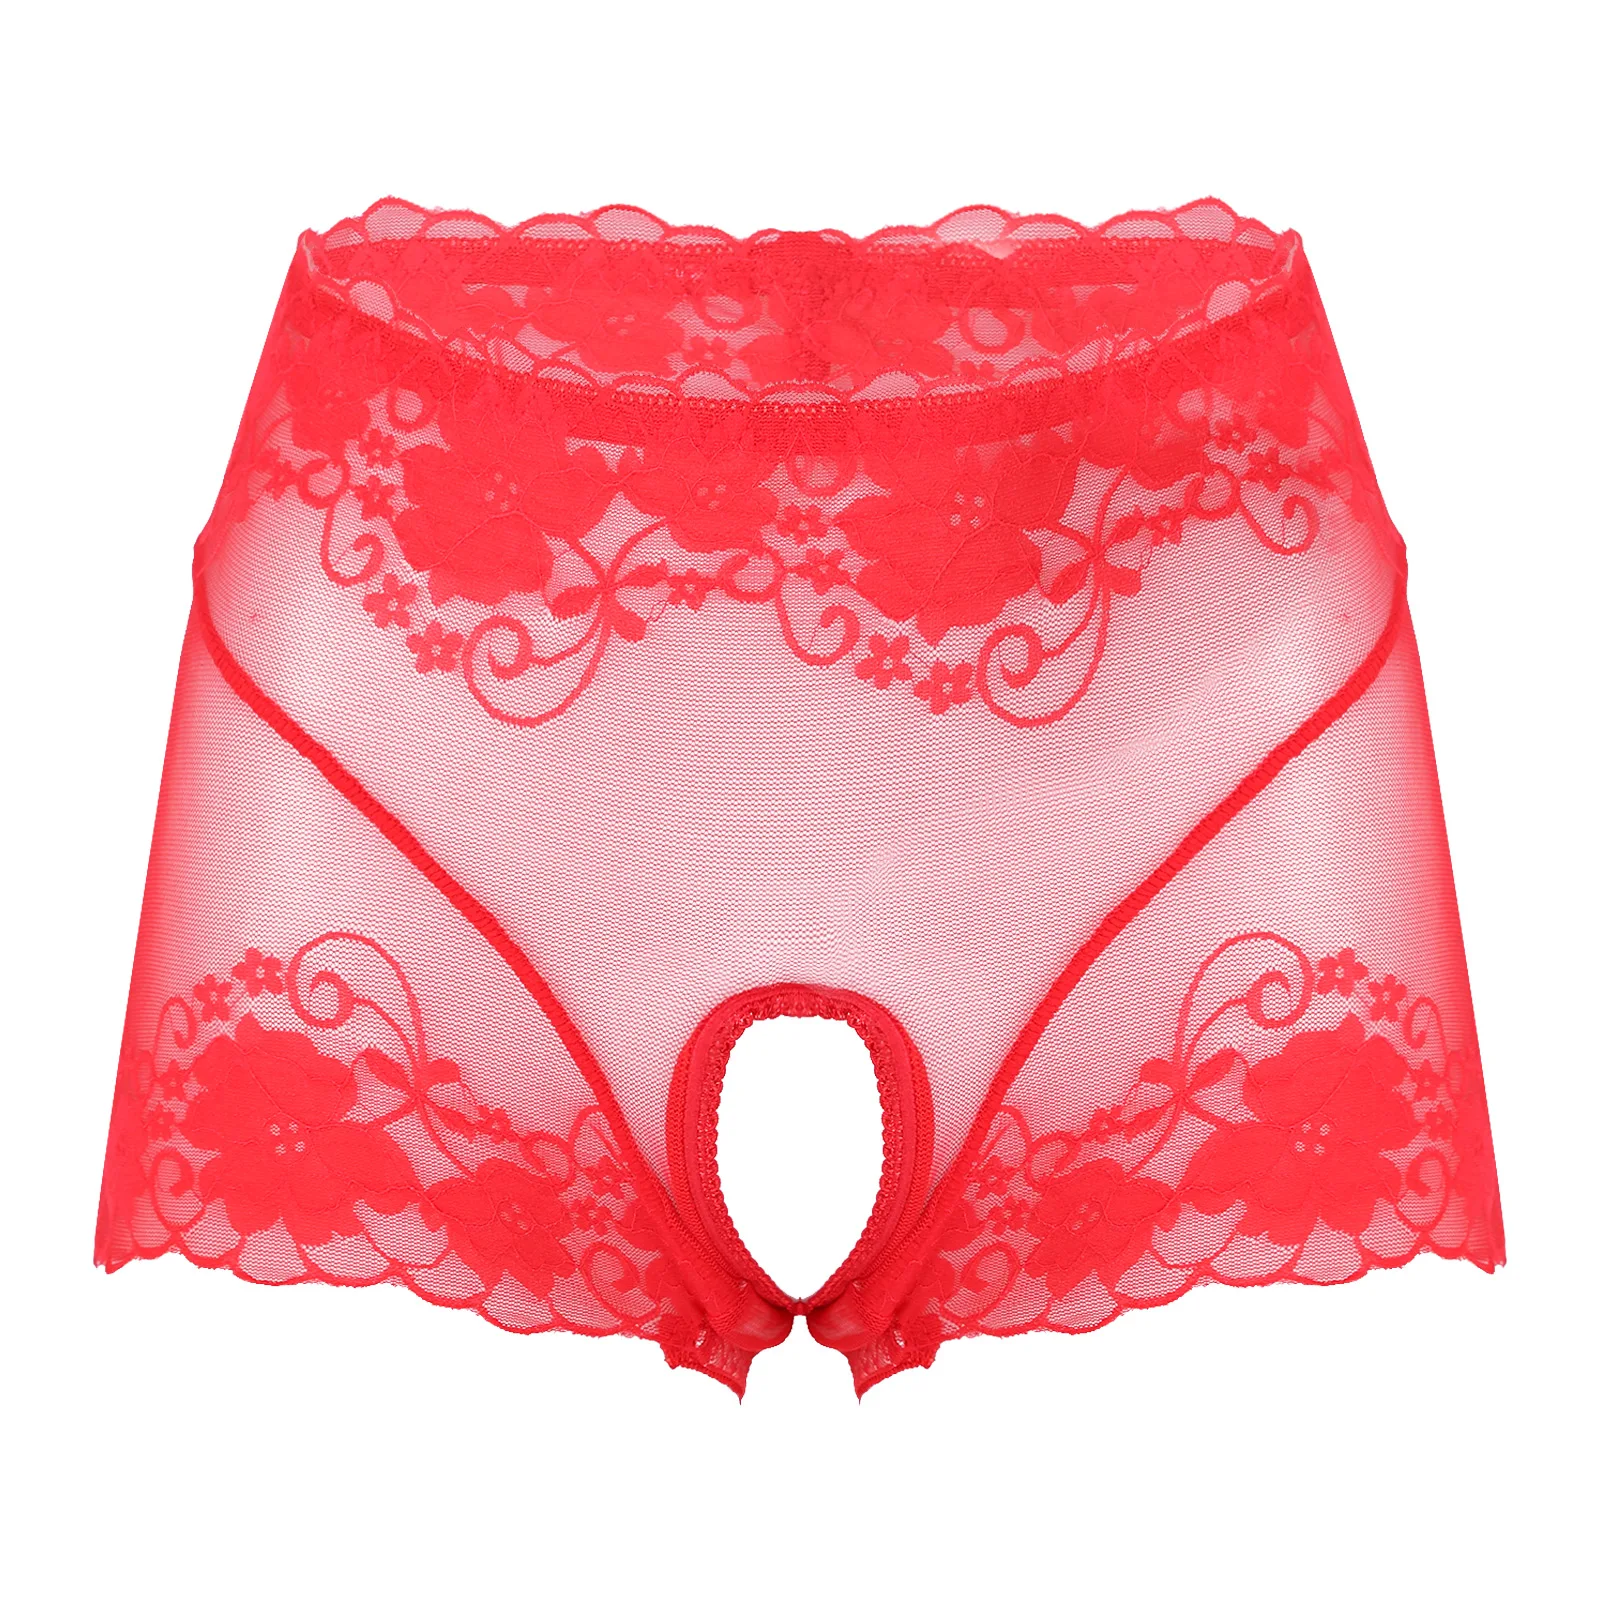 

Womens Floral Lace Crotchless Panties Low Rise See-through Boyshorts Underpants Underwear Sexy Briefs